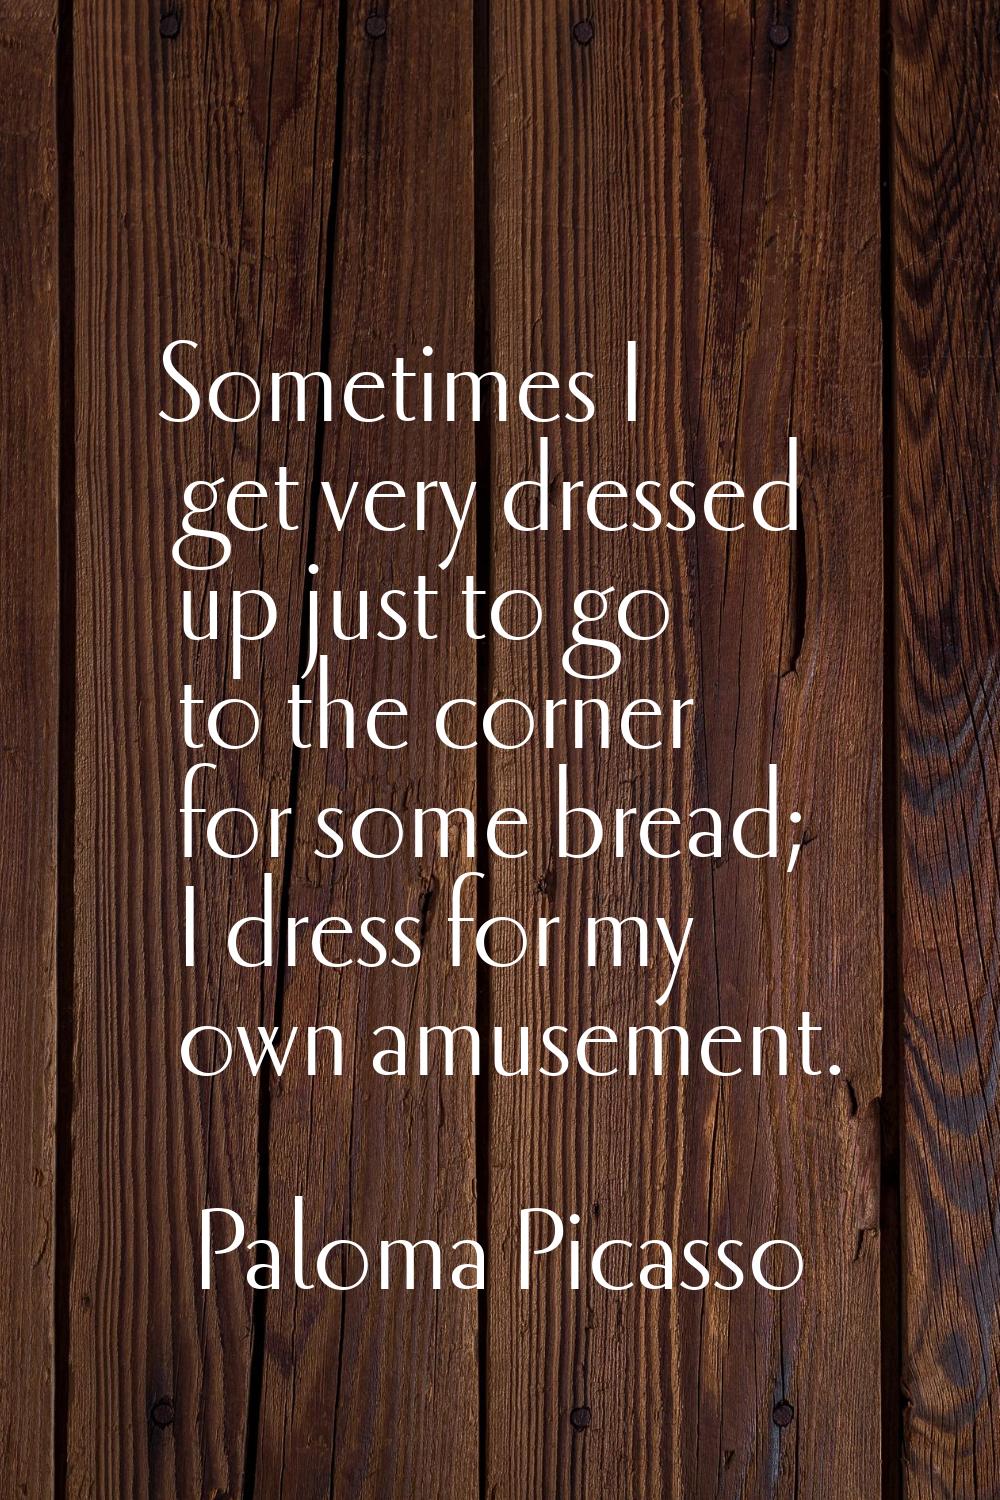 Sometimes I get very dressed up just to go to the corner for some bread; I dress for my own amuseme